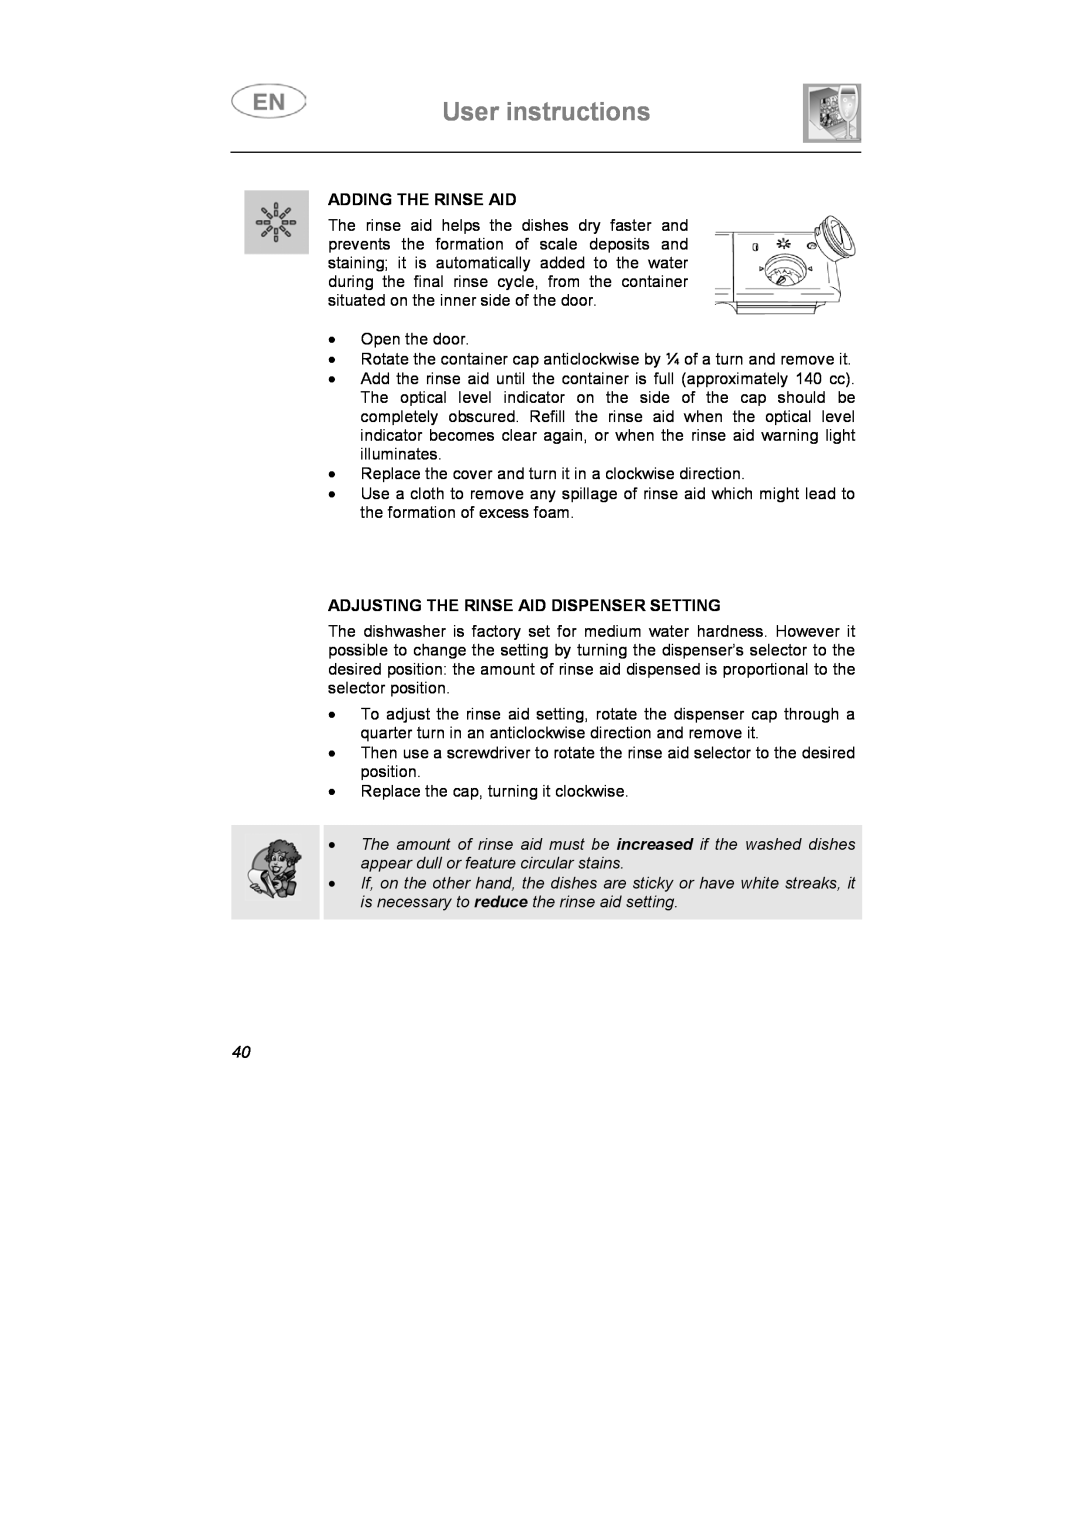 Smeg ST1124S-1 instruction manual User instructions, Adding The Rinse Aid, Adjusting The Rinse Aid Dispenser Setting 